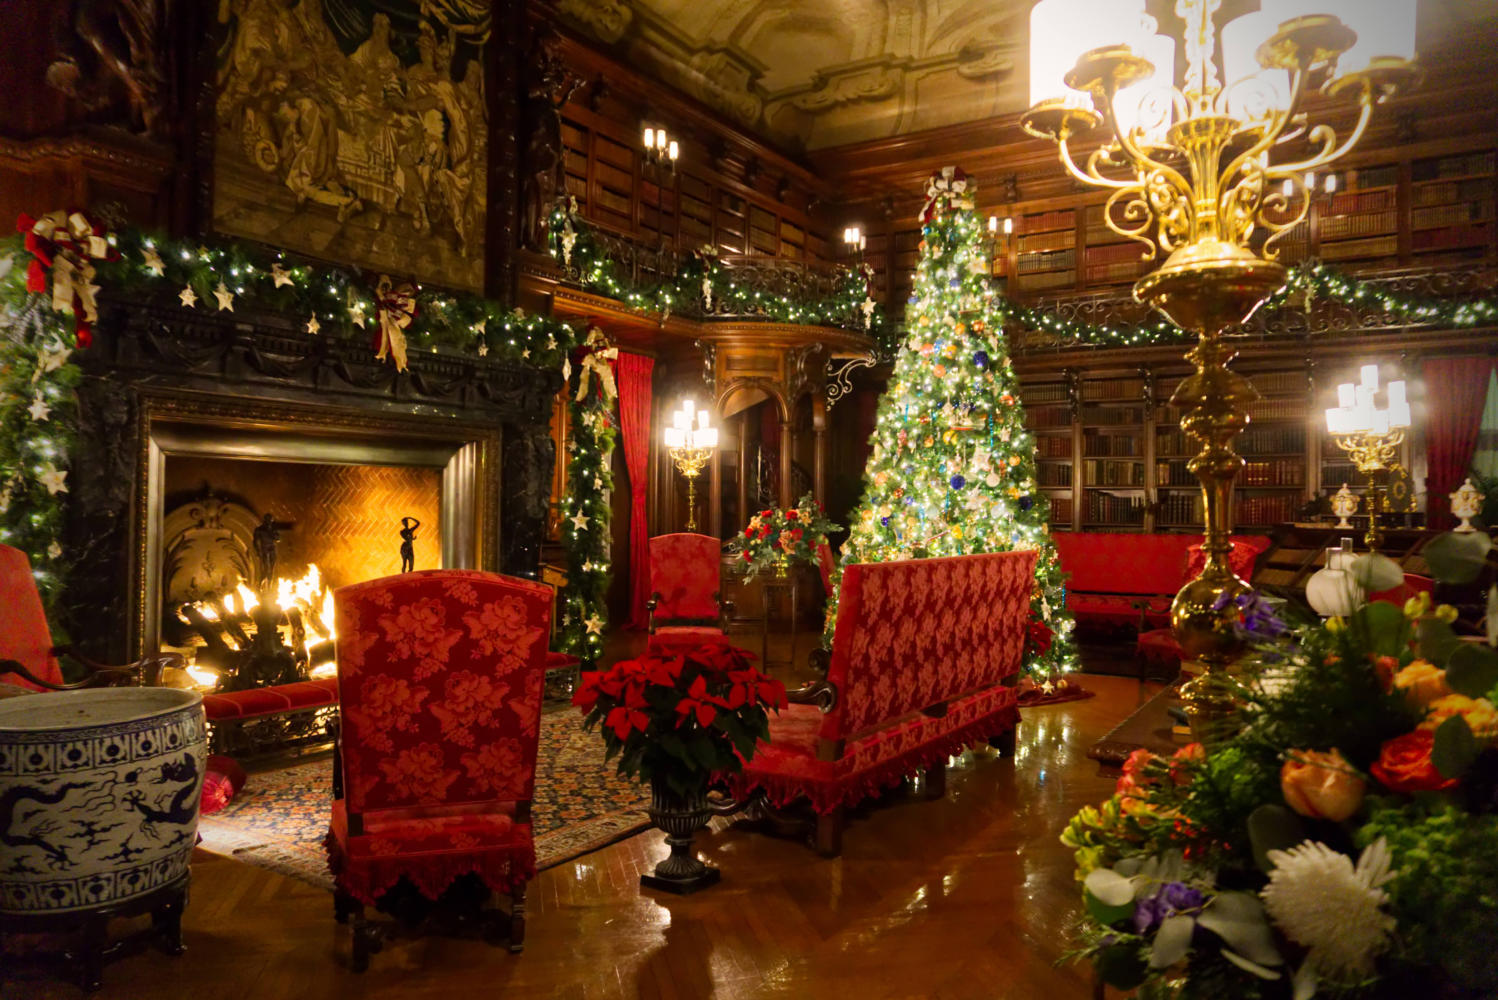 Rooms which were used for filming A Biltmore Christmas were decorated in italian design